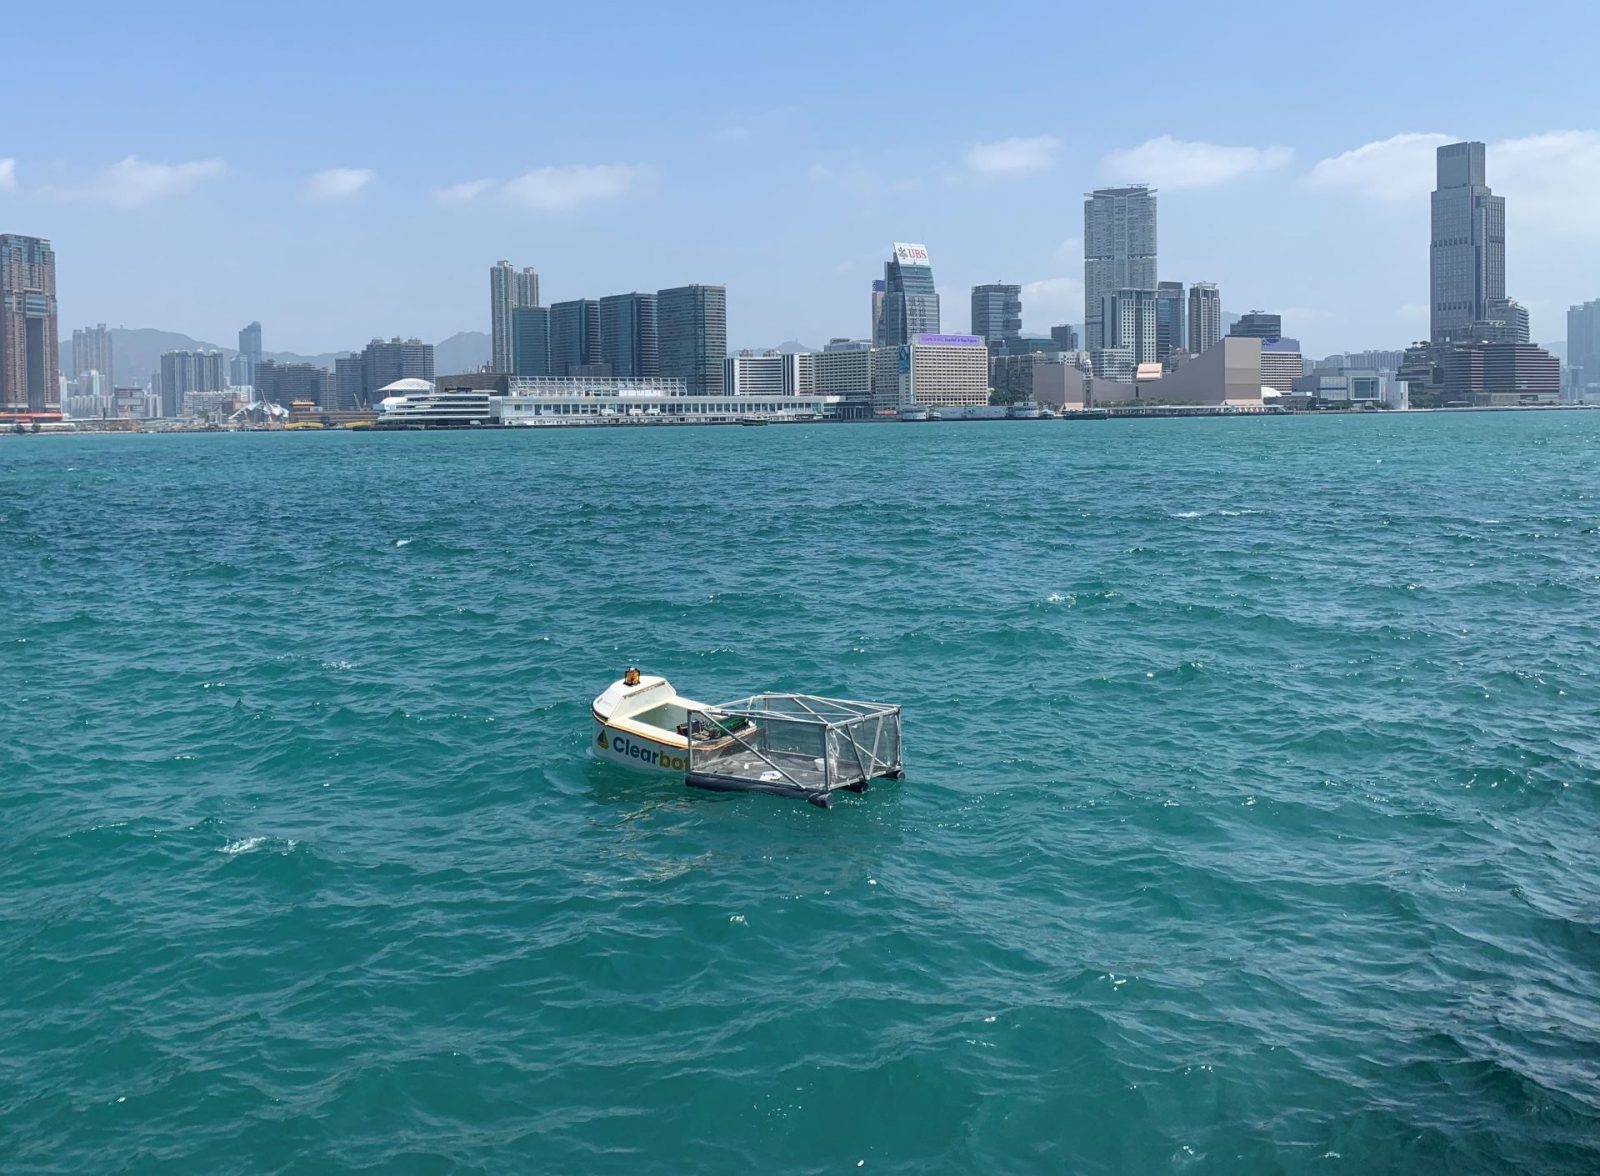 A small boat on the water with a city skyline in the background.